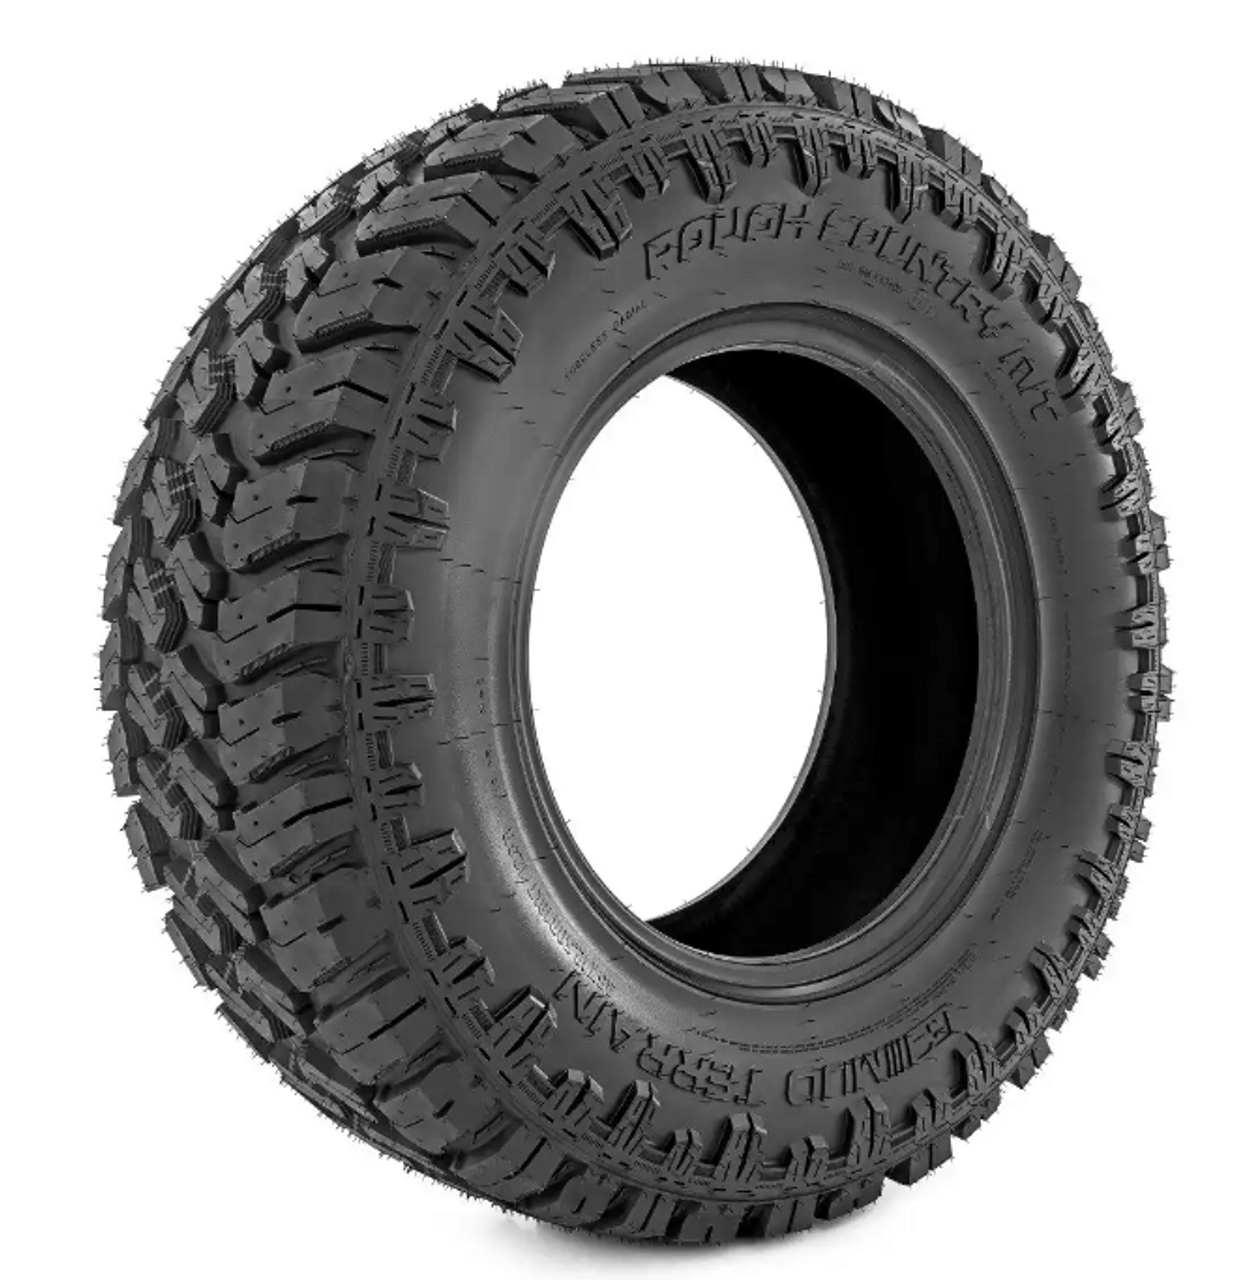 Rough Country 33X12050R18 Rough Country M/T (Dual Sidewall) (98010129)-Main View